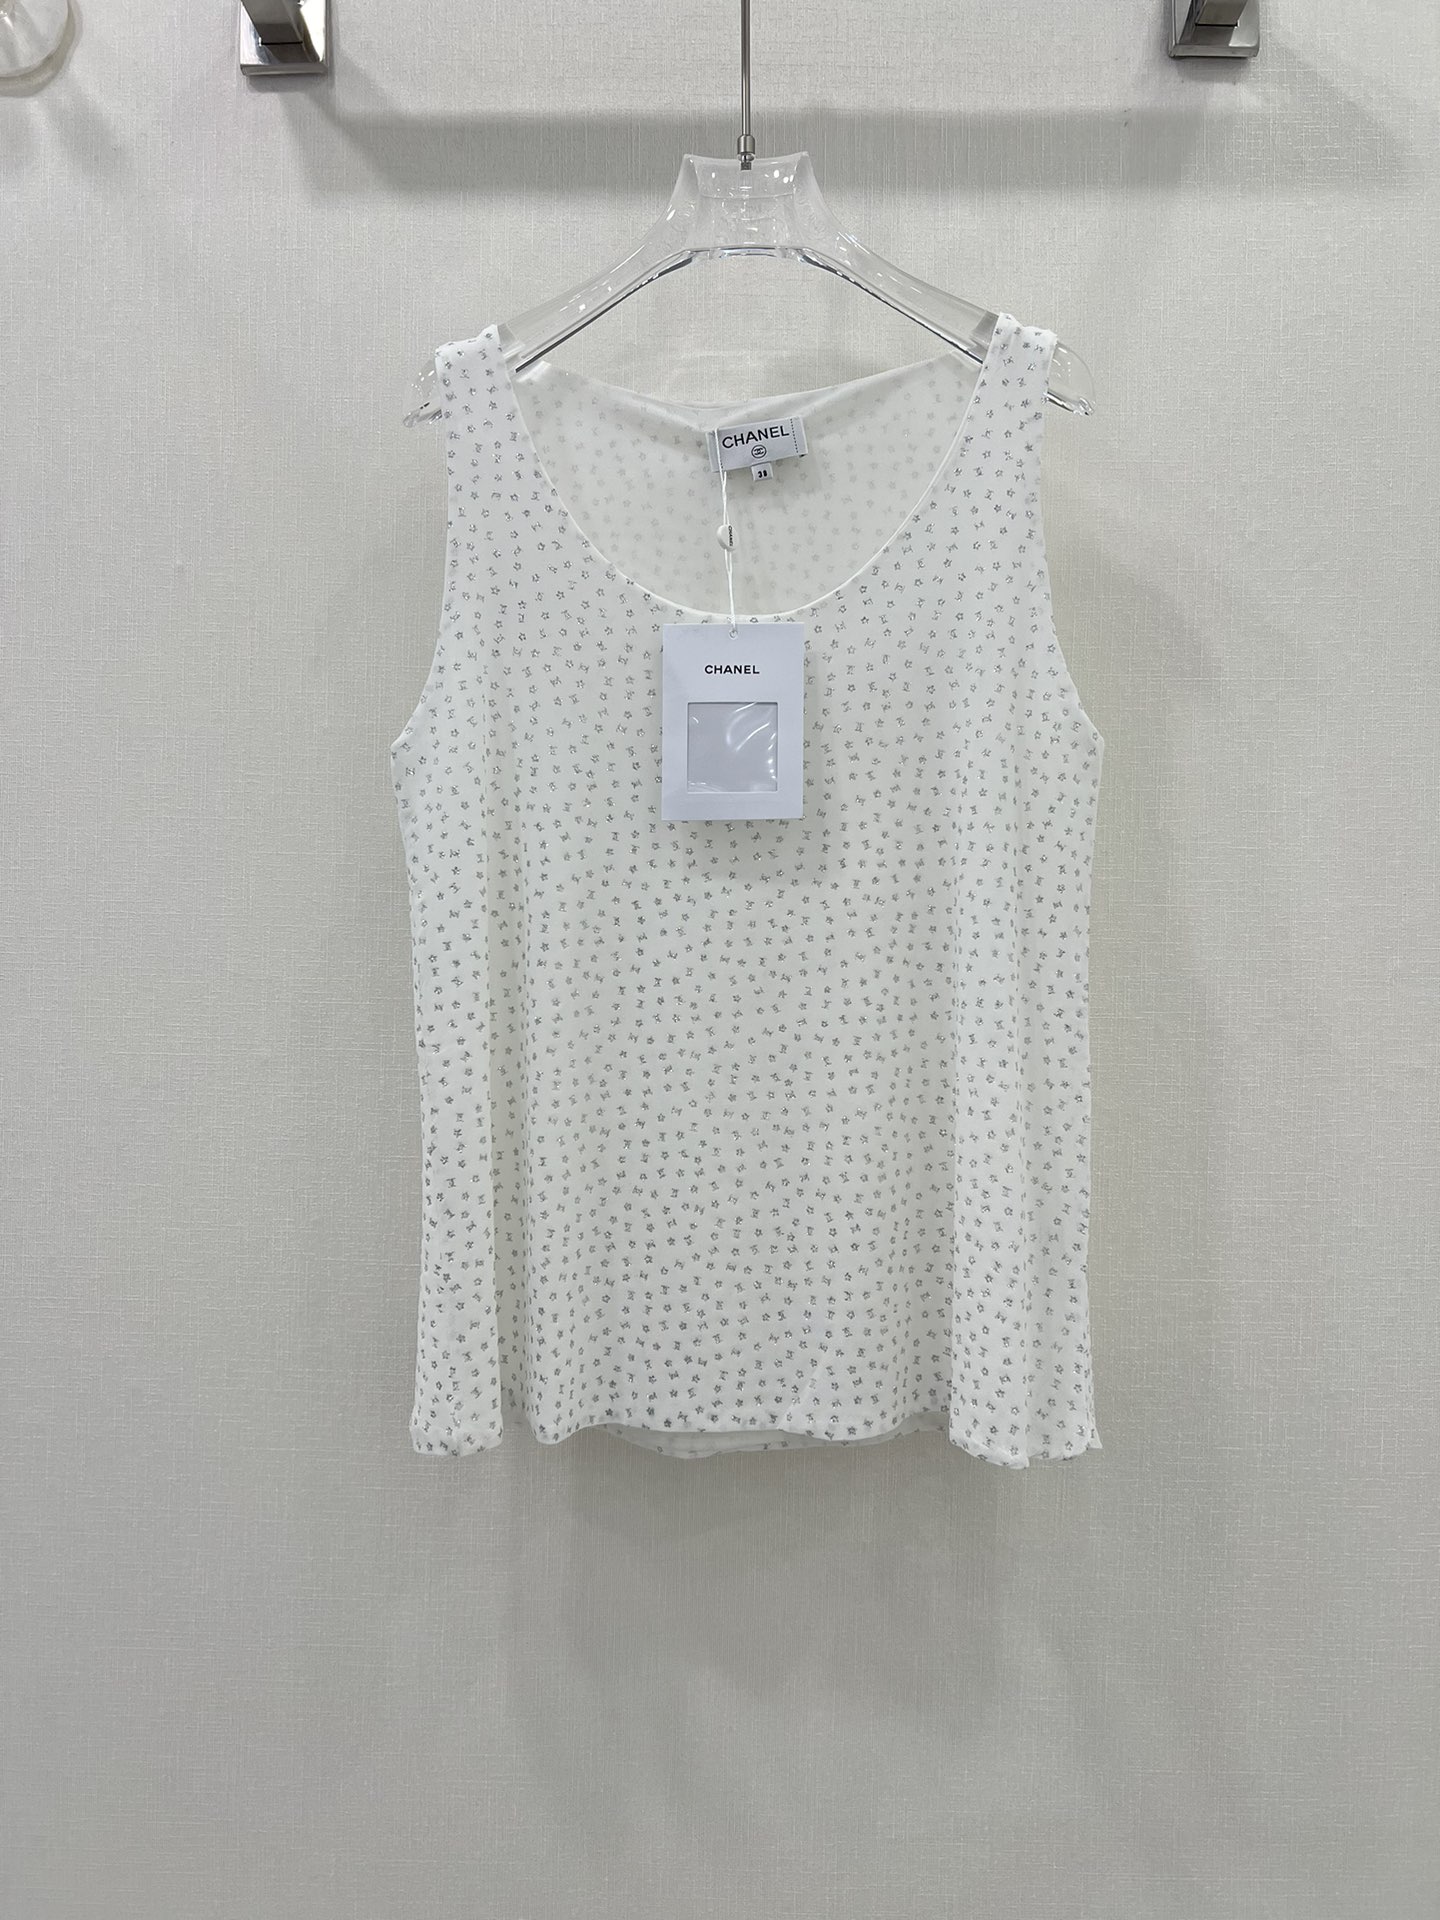 Chanel Clothing Tank Tops&Camis Silver White Gauze